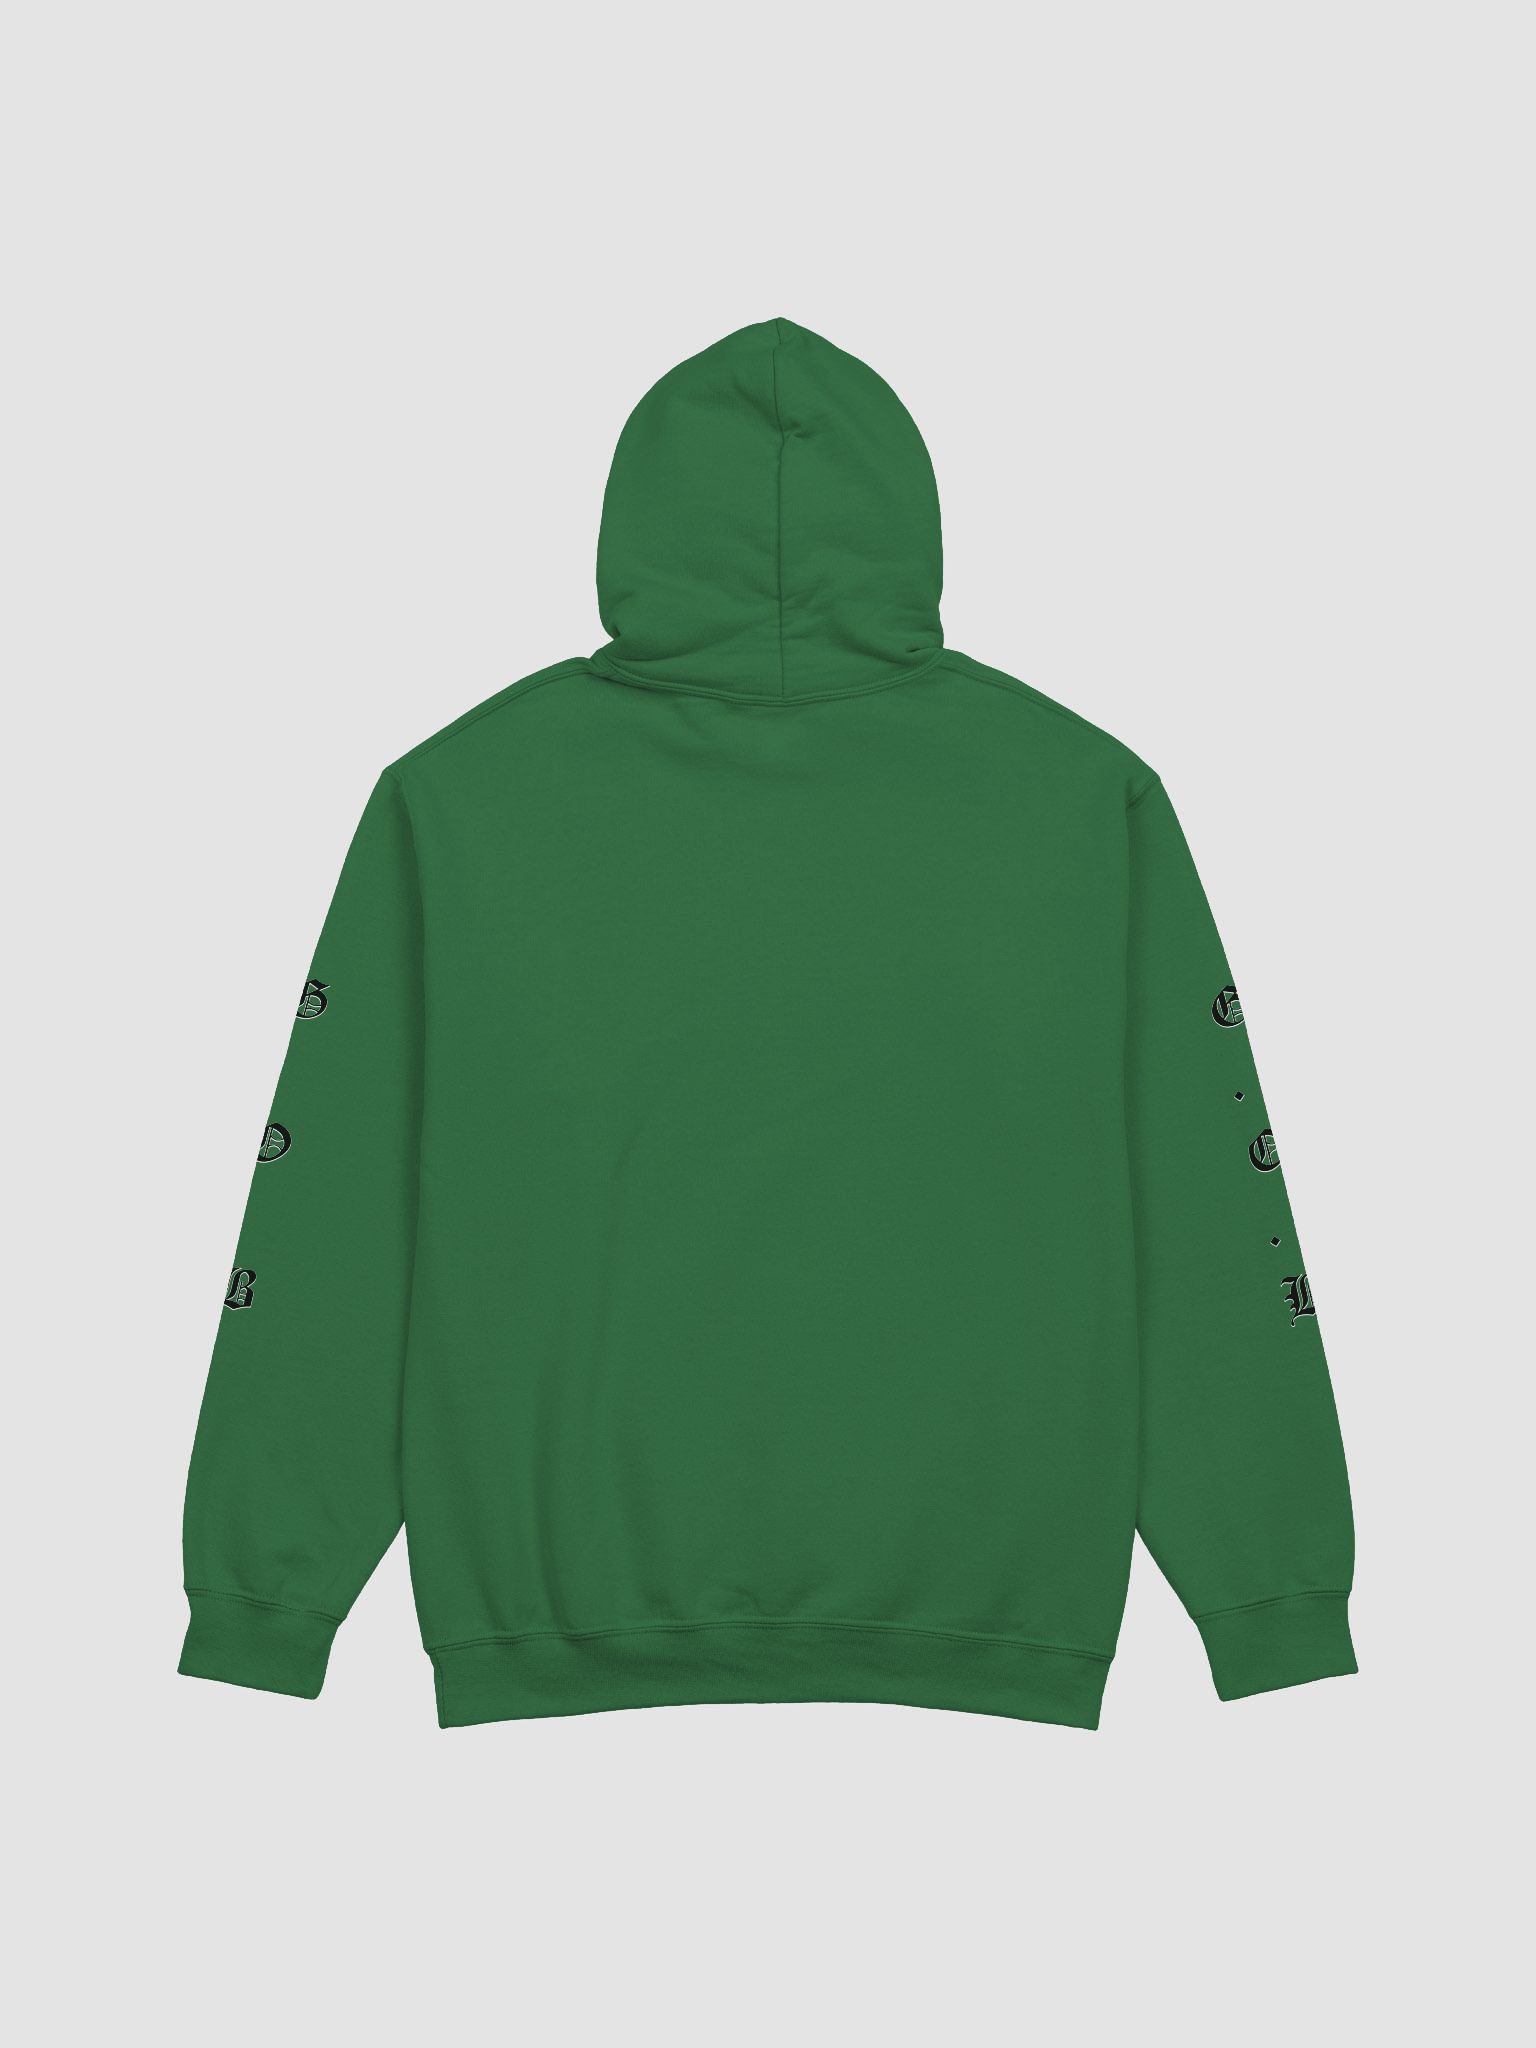 The Notorious G.O.B Hoodie | Goblin's Merch Store